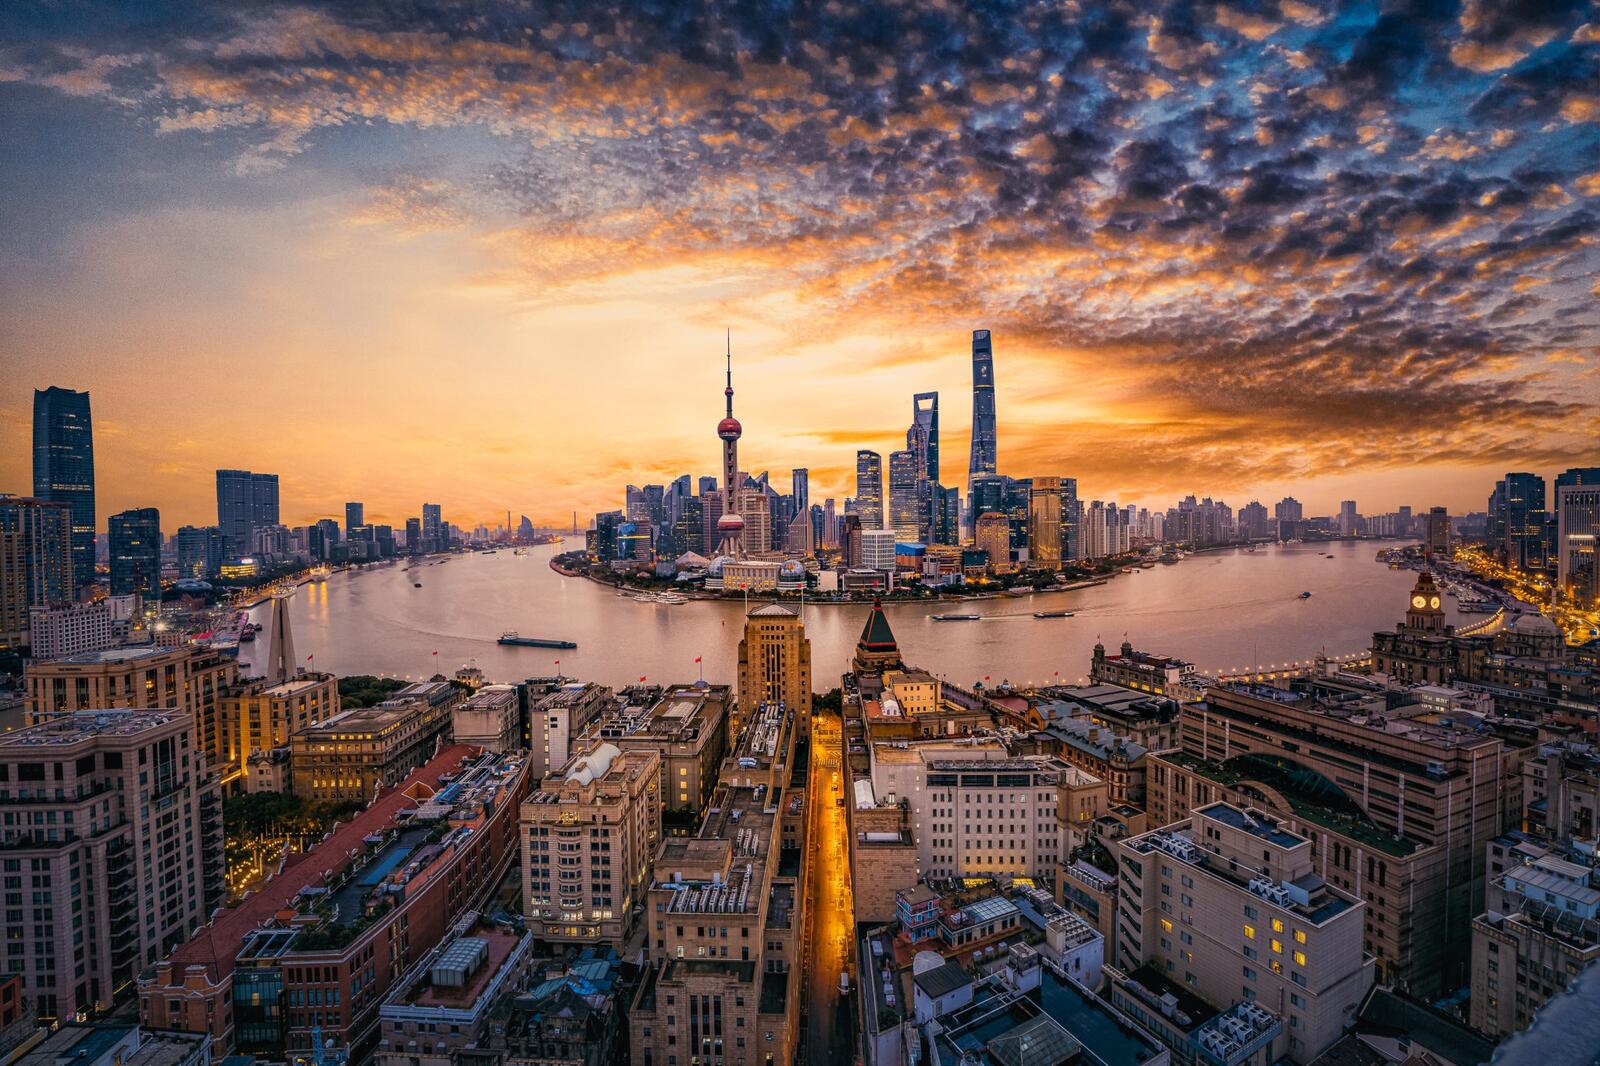 Wallpapers Shanghai China sunset on the desktop